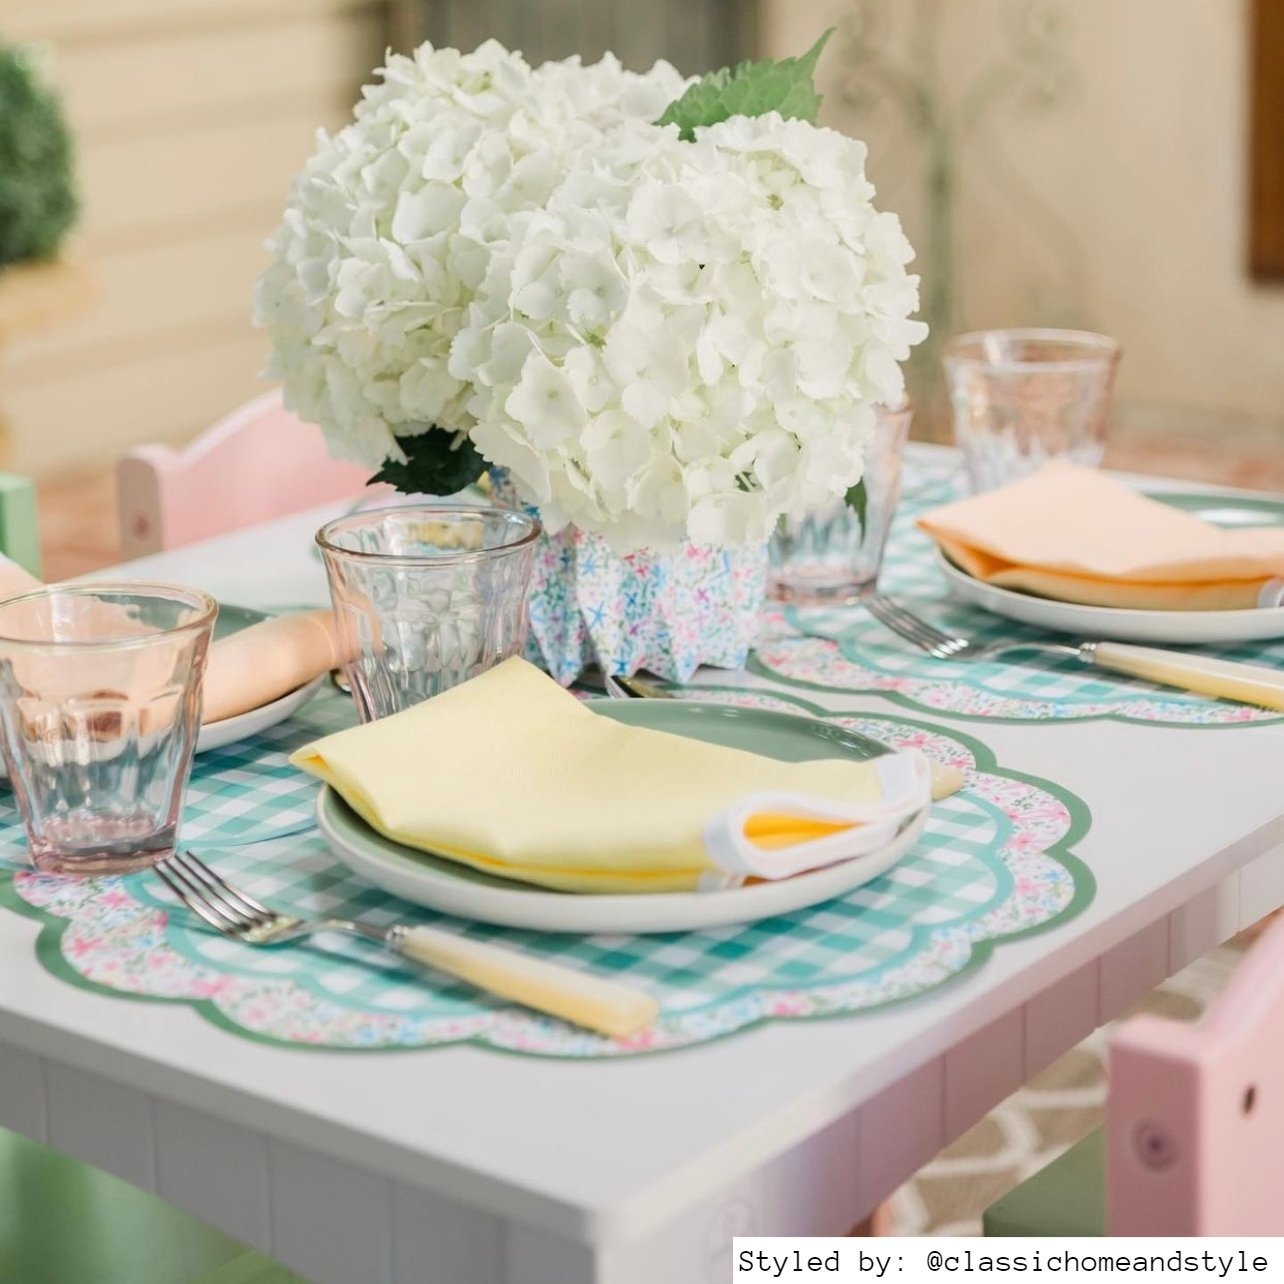 Table setting with multicolored floral scalloped round paper placemats layered with green gingham paper chargers, green plates and a yellow napkin with multicolored floral paper vases and white flowers as centerpieces